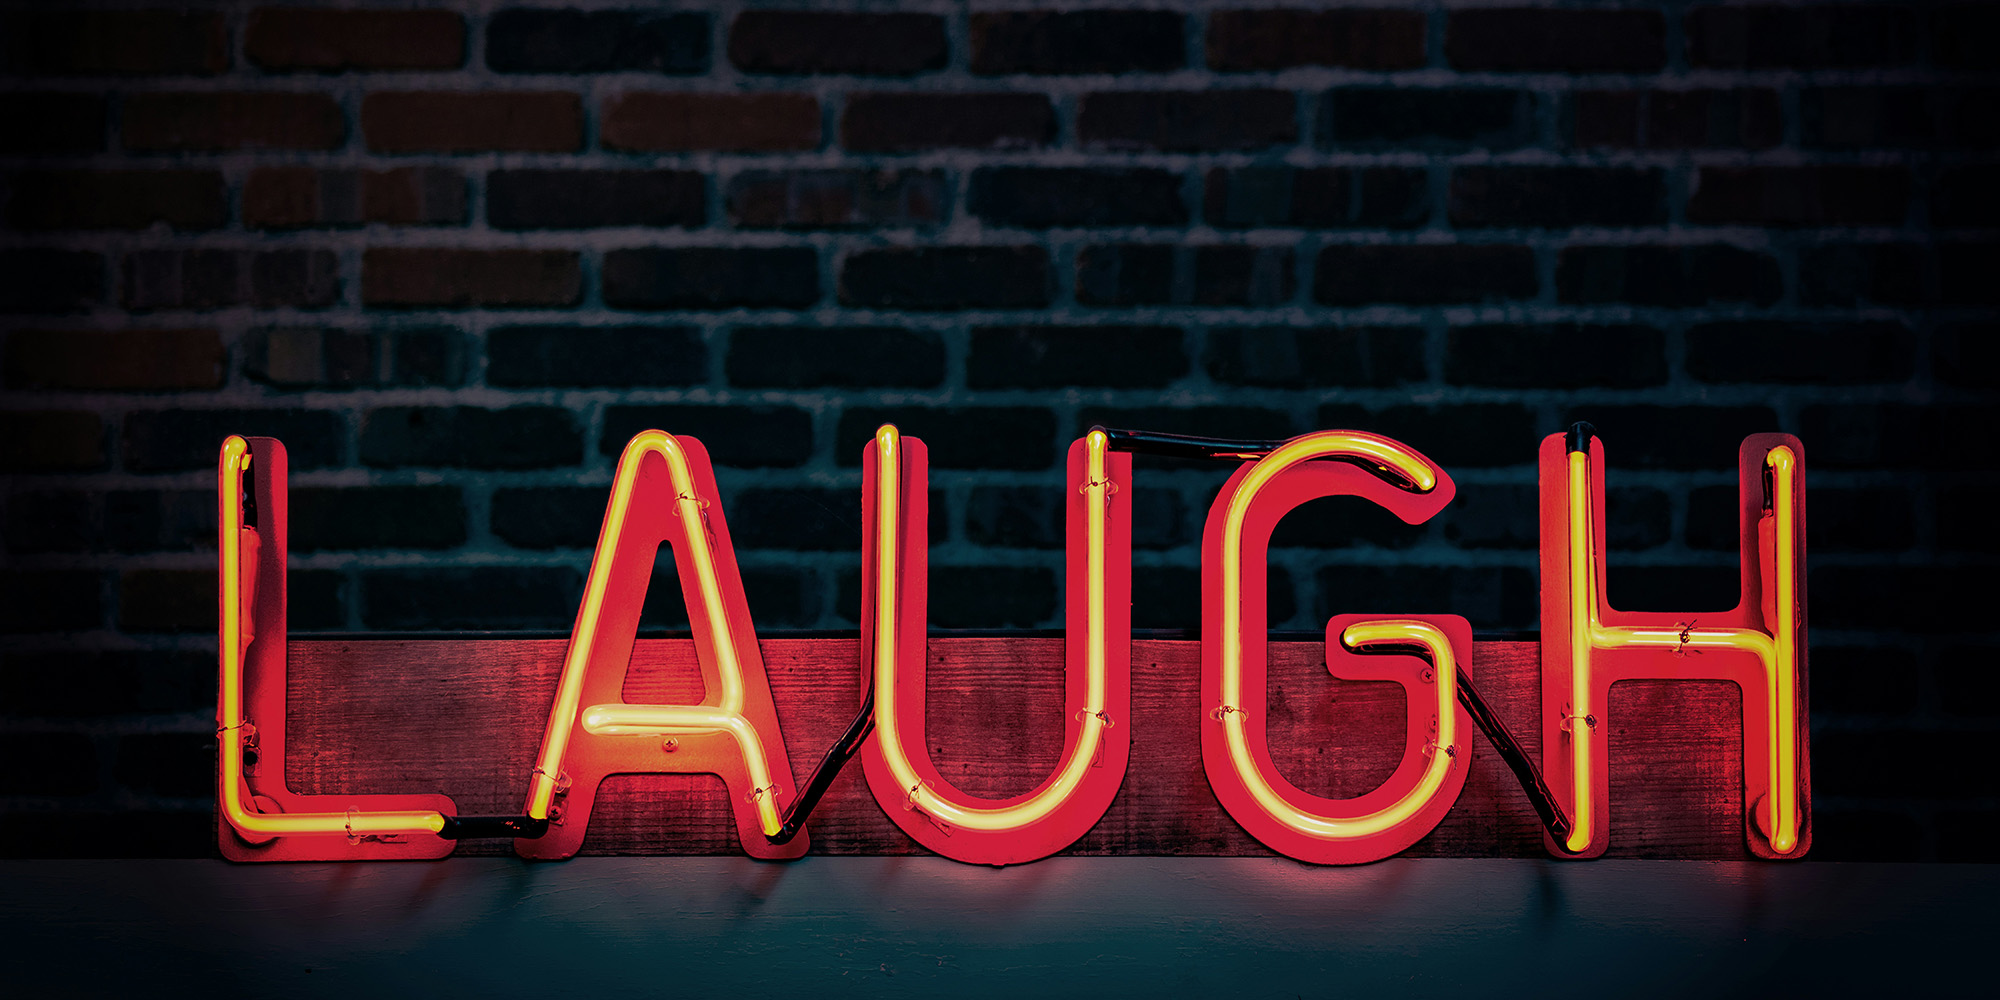 neon sign that says laugh